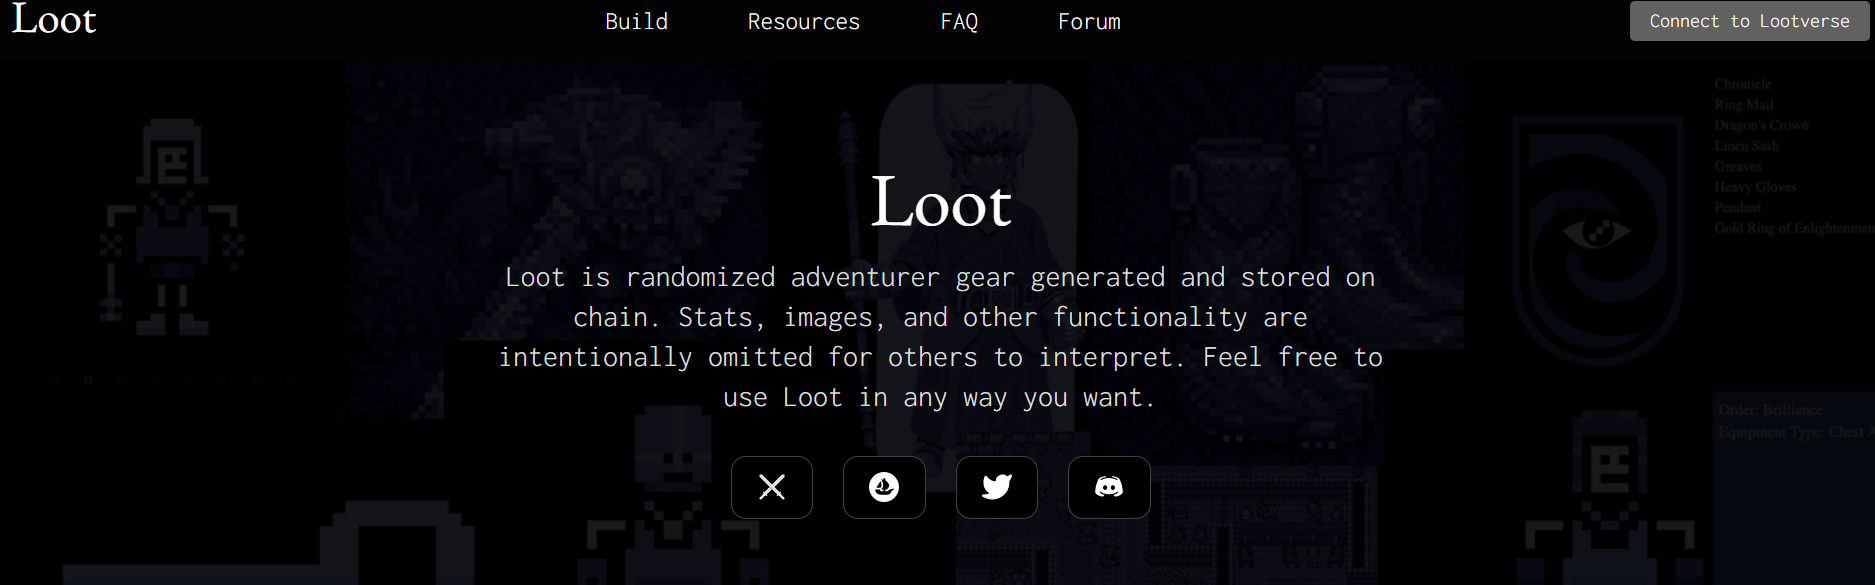 The Loot Project Community